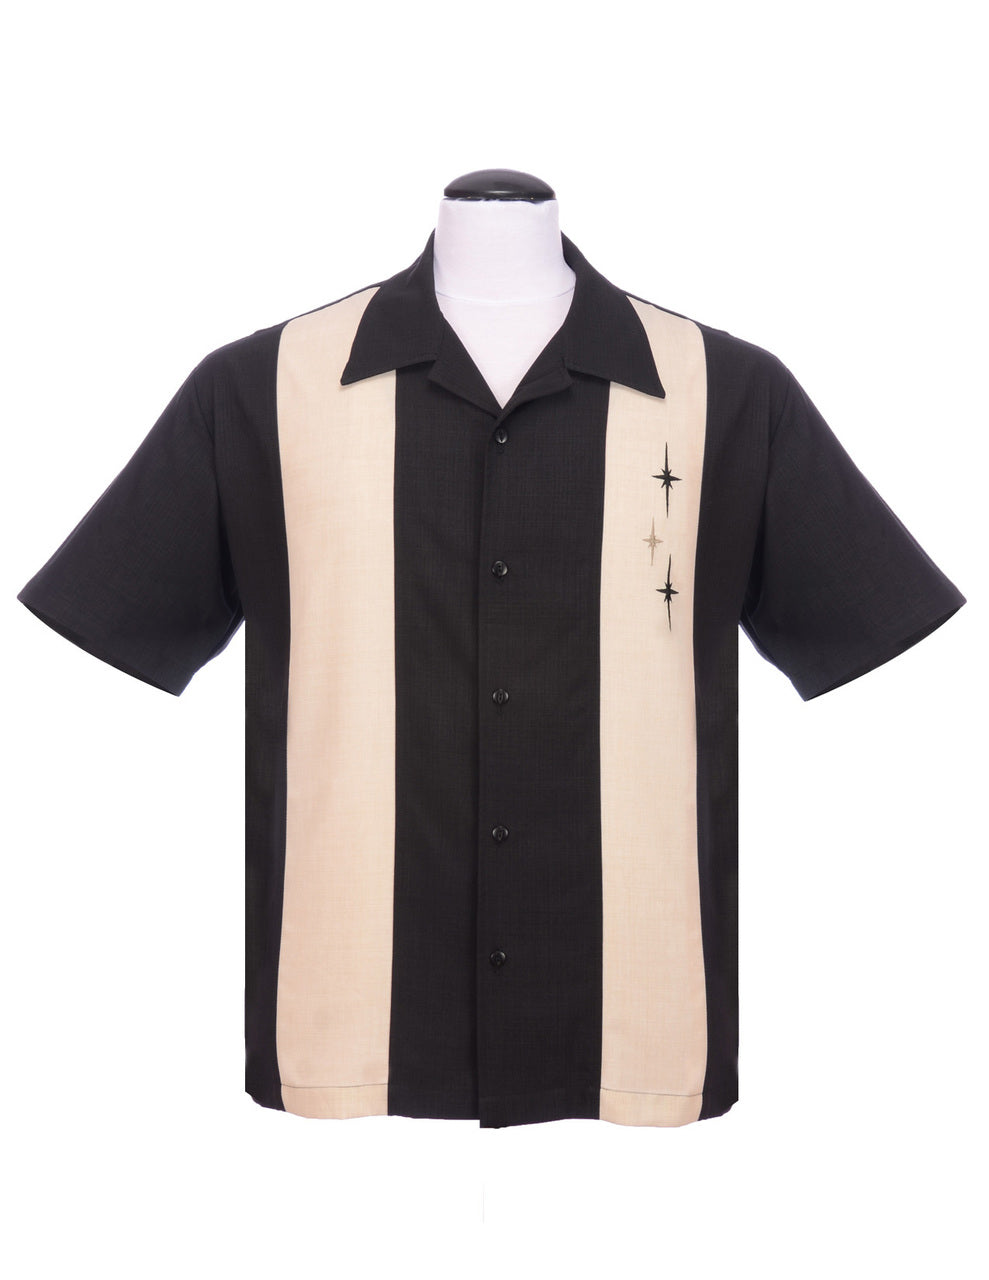 Three Star Panel Bowling Shirt in Black by Steady Clothing